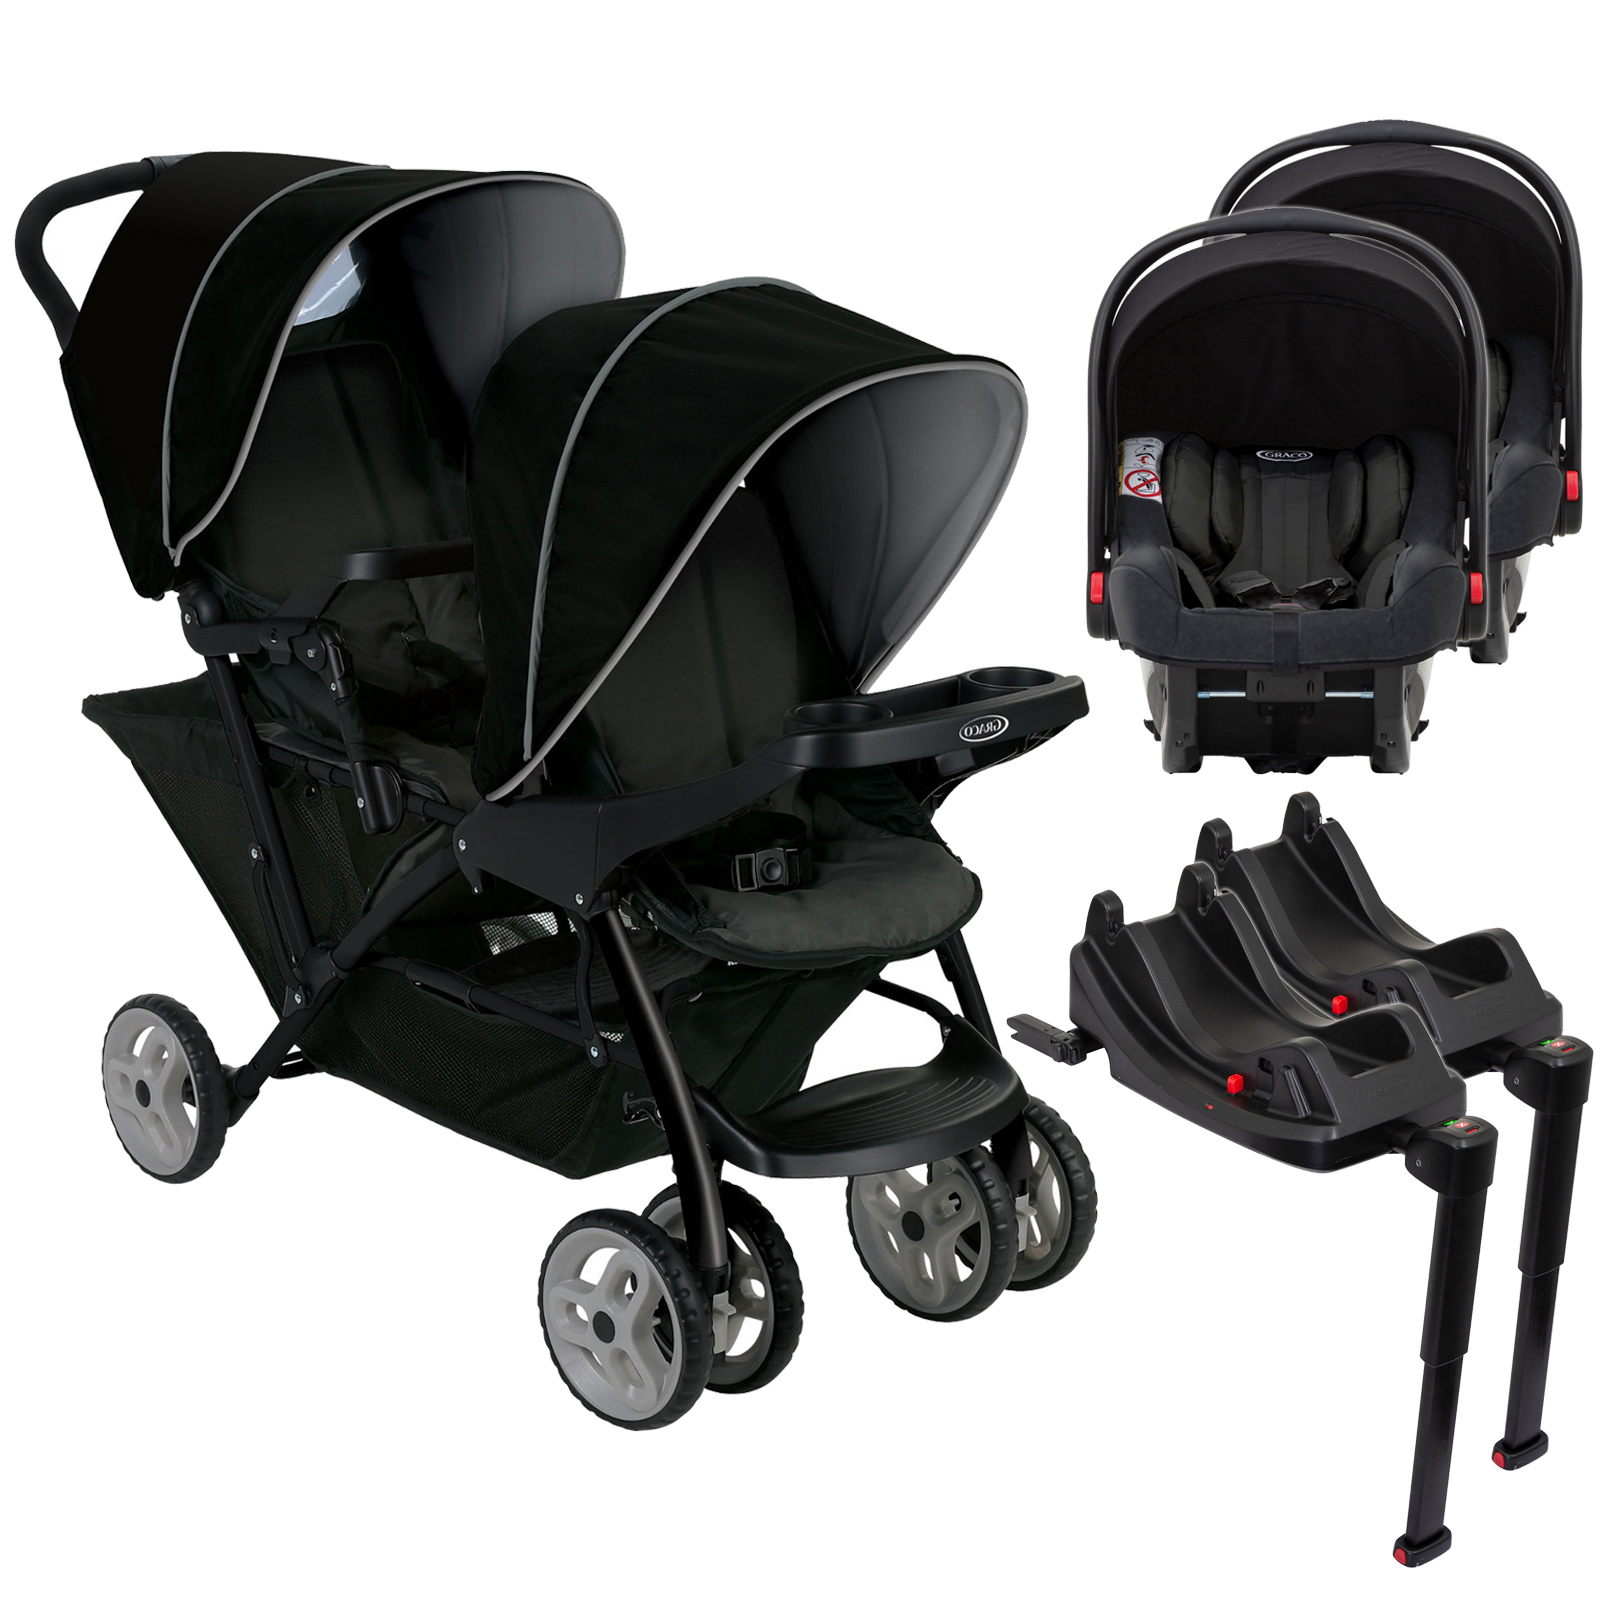 Graco Stadium Duo Double Pram Twin Travel System With 2 Snugride I Size Car Seat Bases Black Grey